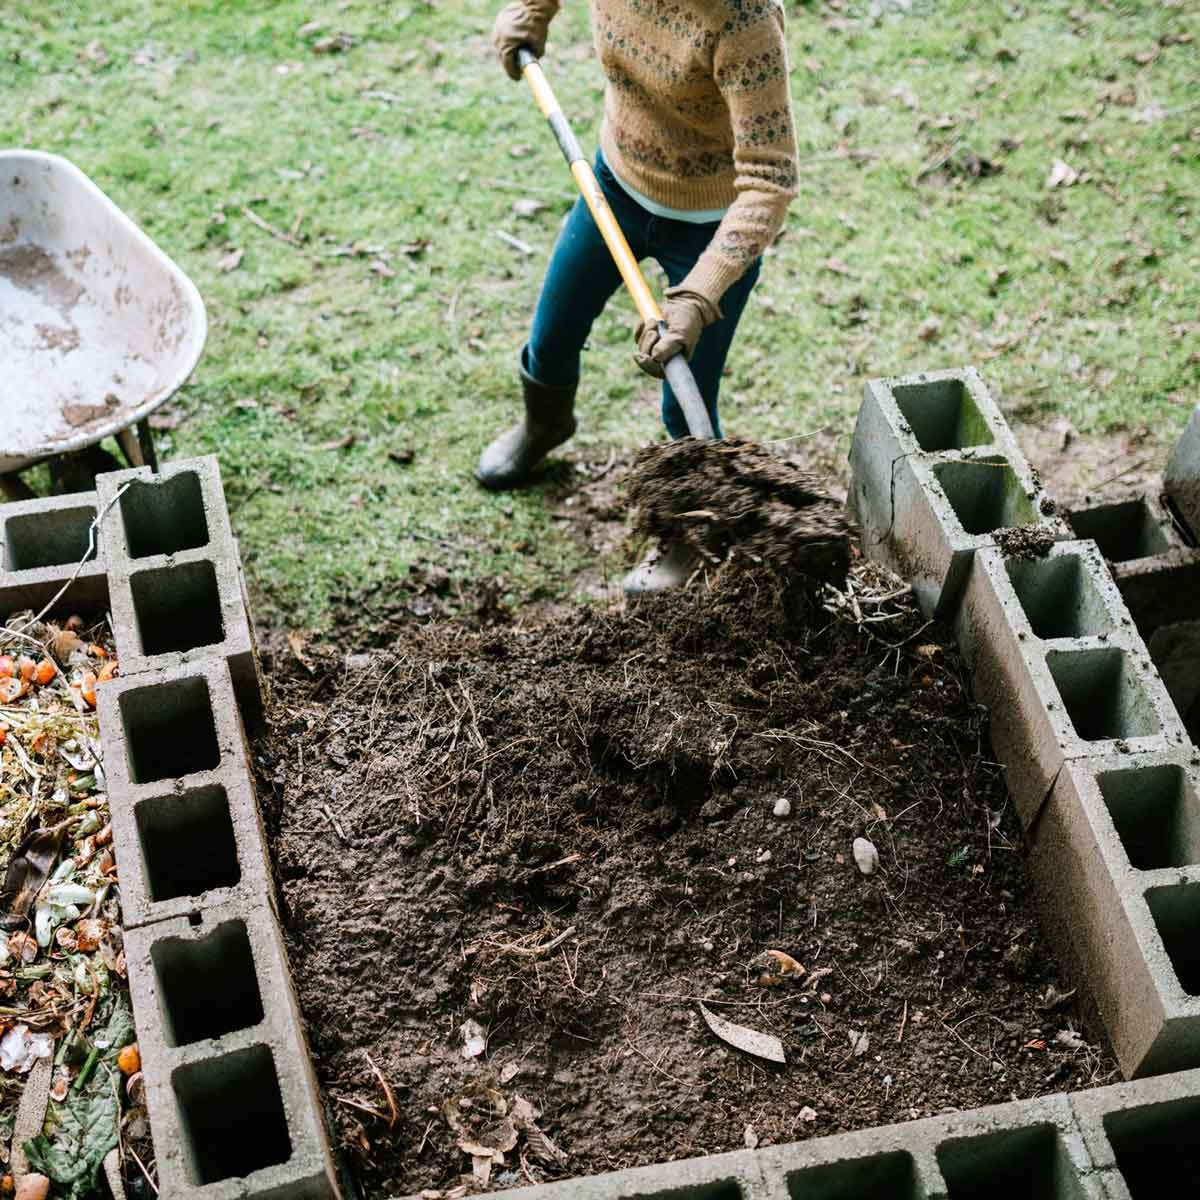 Making And Mixing Compost Is Easy With This Brilliant Garden Tool! 